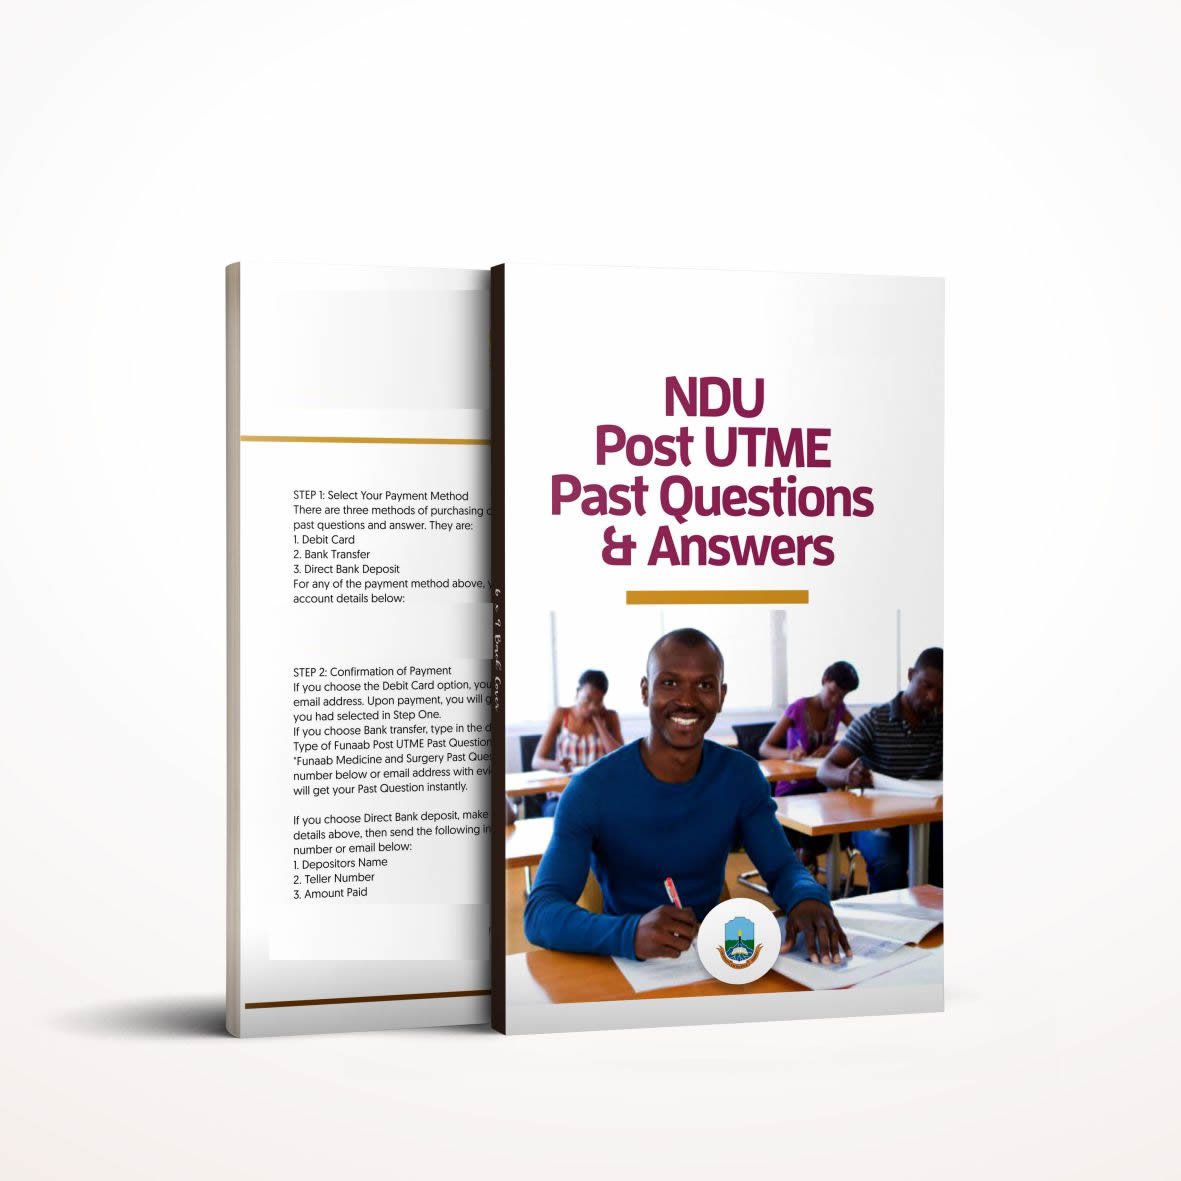 NDU post utme past questions and answers - Pdf